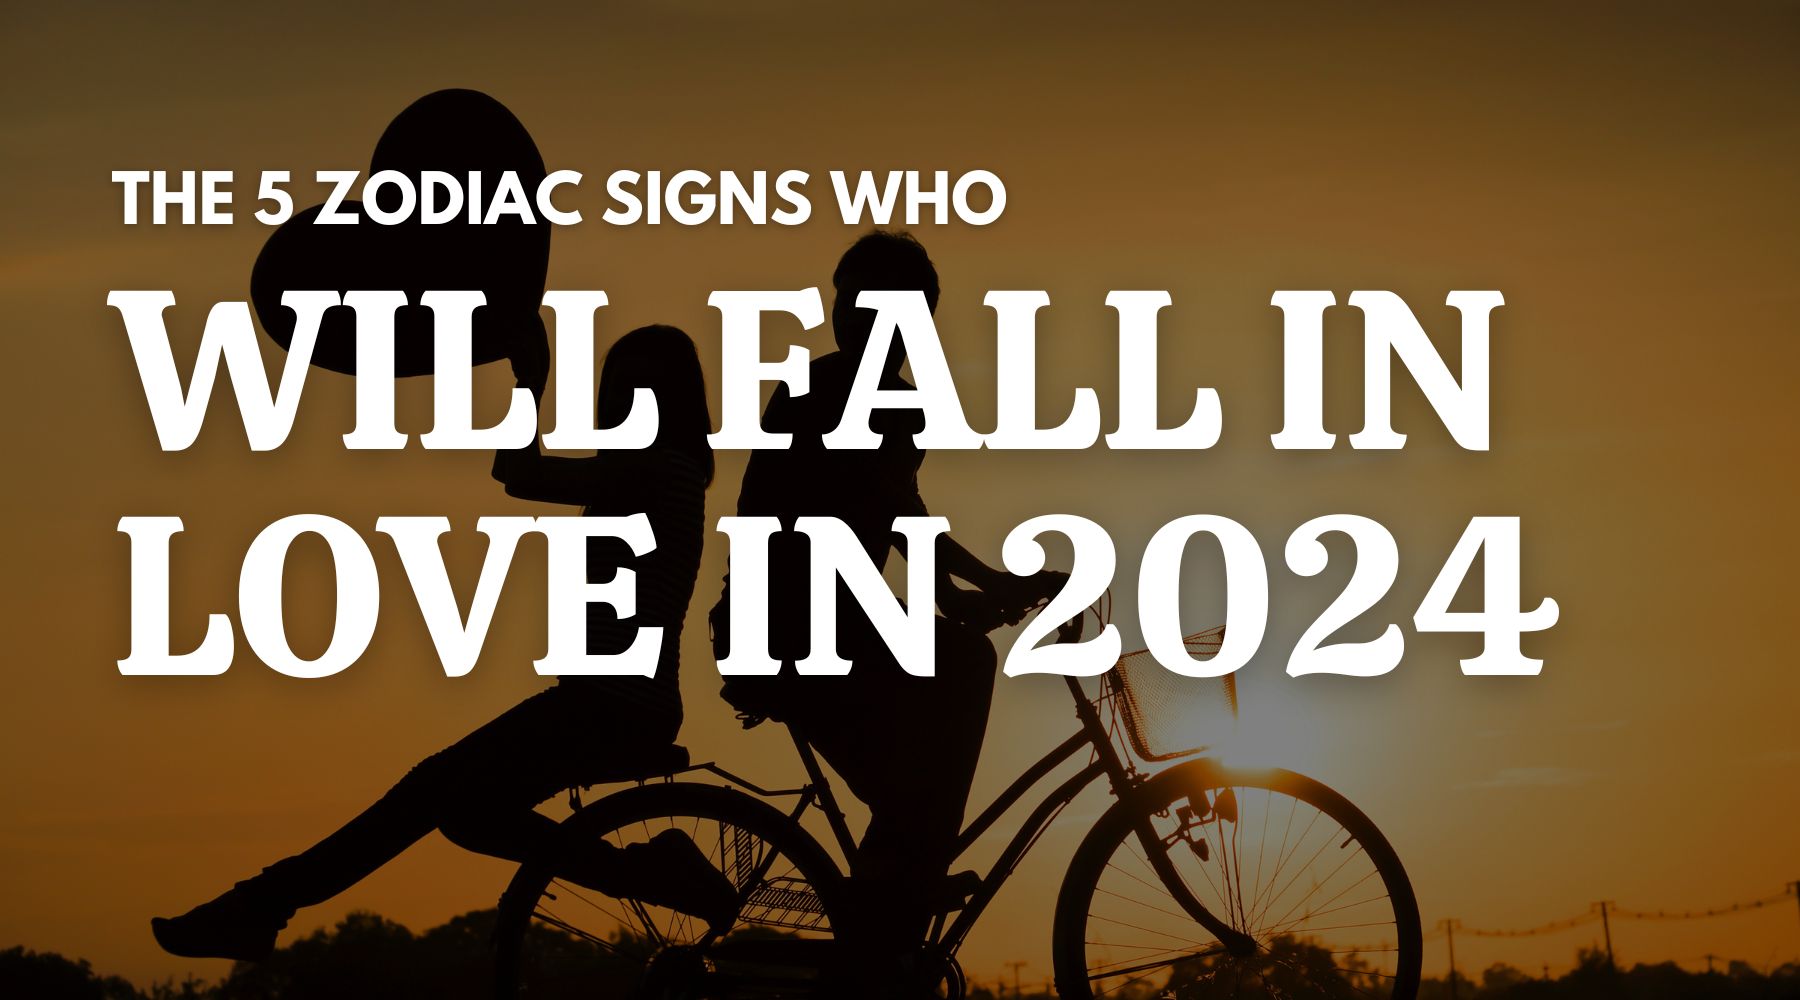 The Zodiac Signs Who Will Most Likely to Find Love in 2024